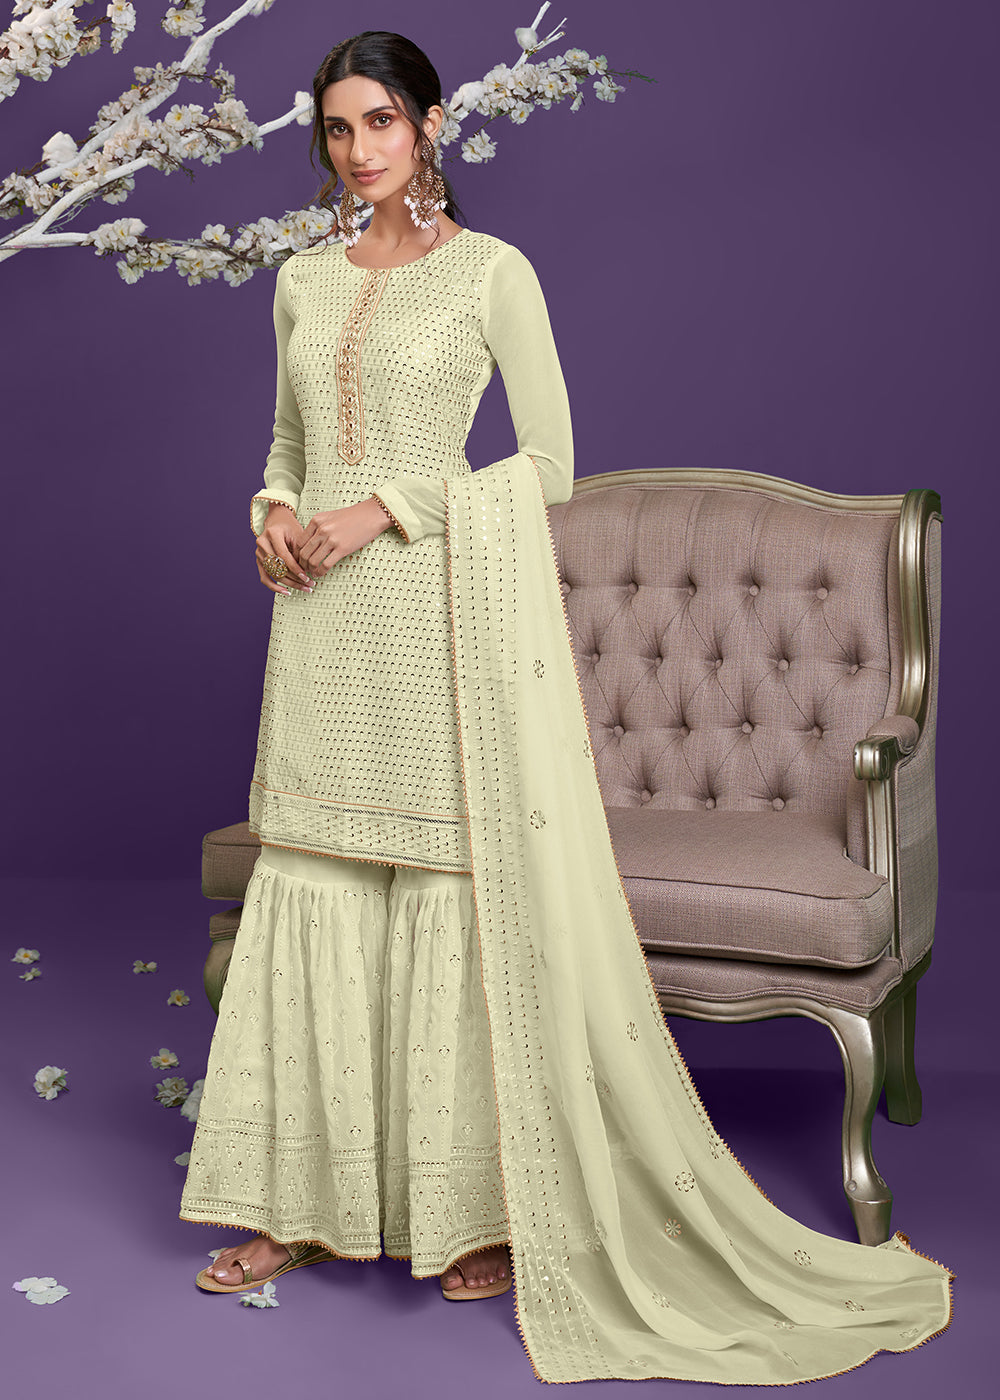 Shop Now Lemon Yellow Khatli Work Embroidered Georgette Sharara Suit Online at Empress Clothing in USA, UK, Canada, Germany & Worldwide. 